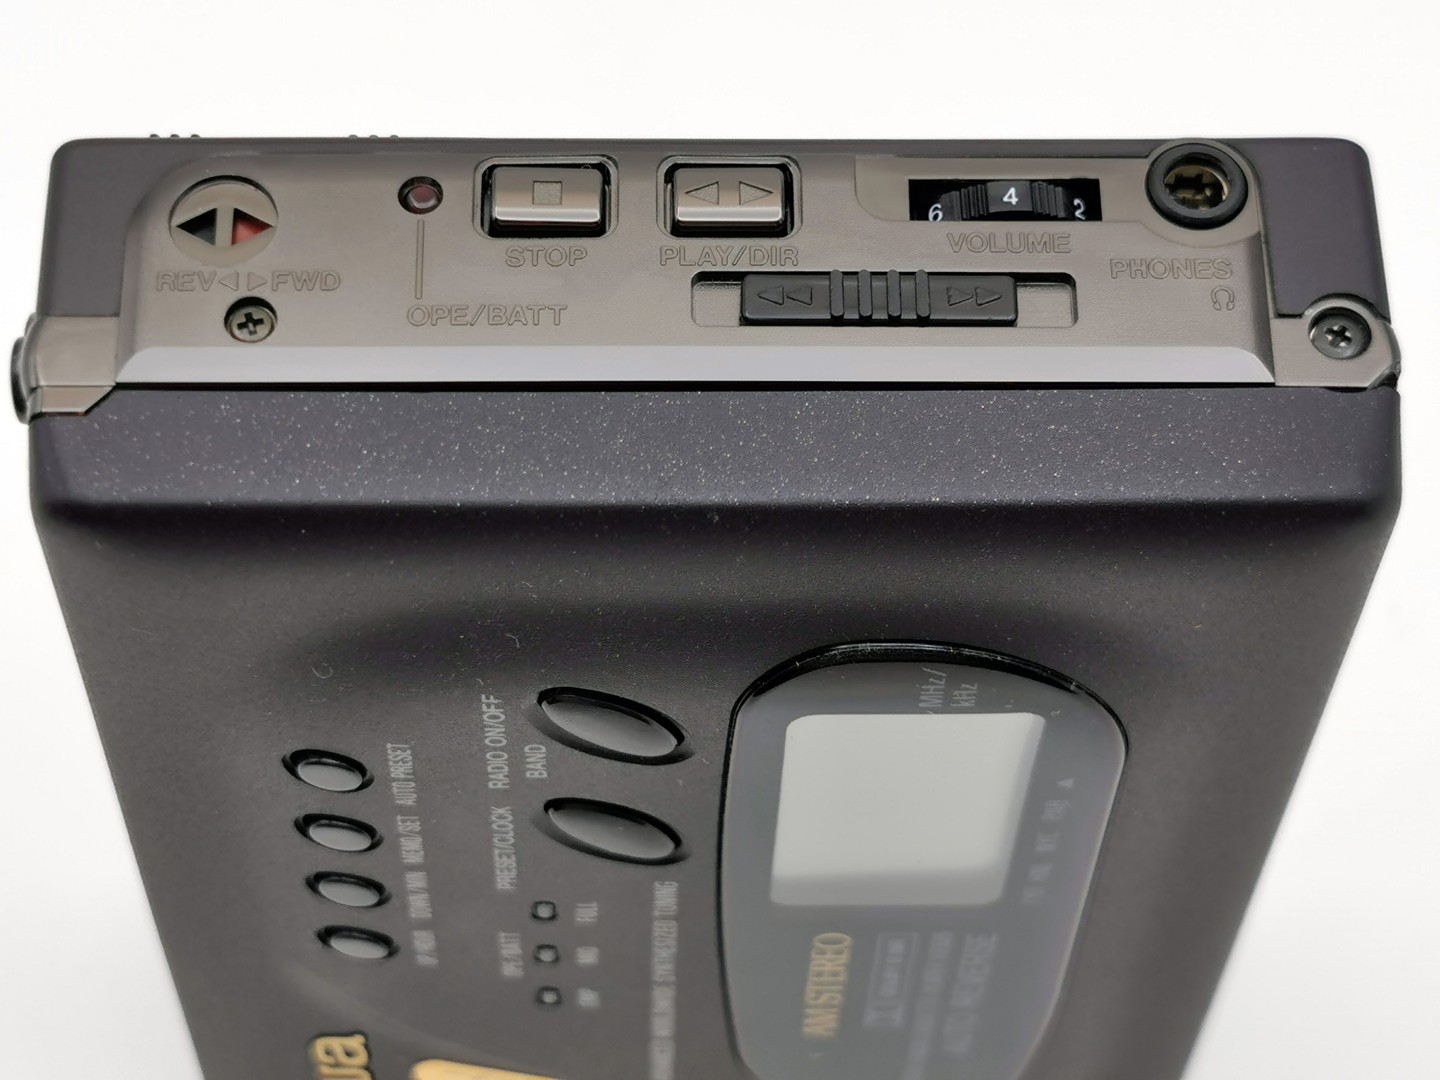 Aiwa-HS-RX626-Top-with-controls-front-angled-ig-boxedwalkman